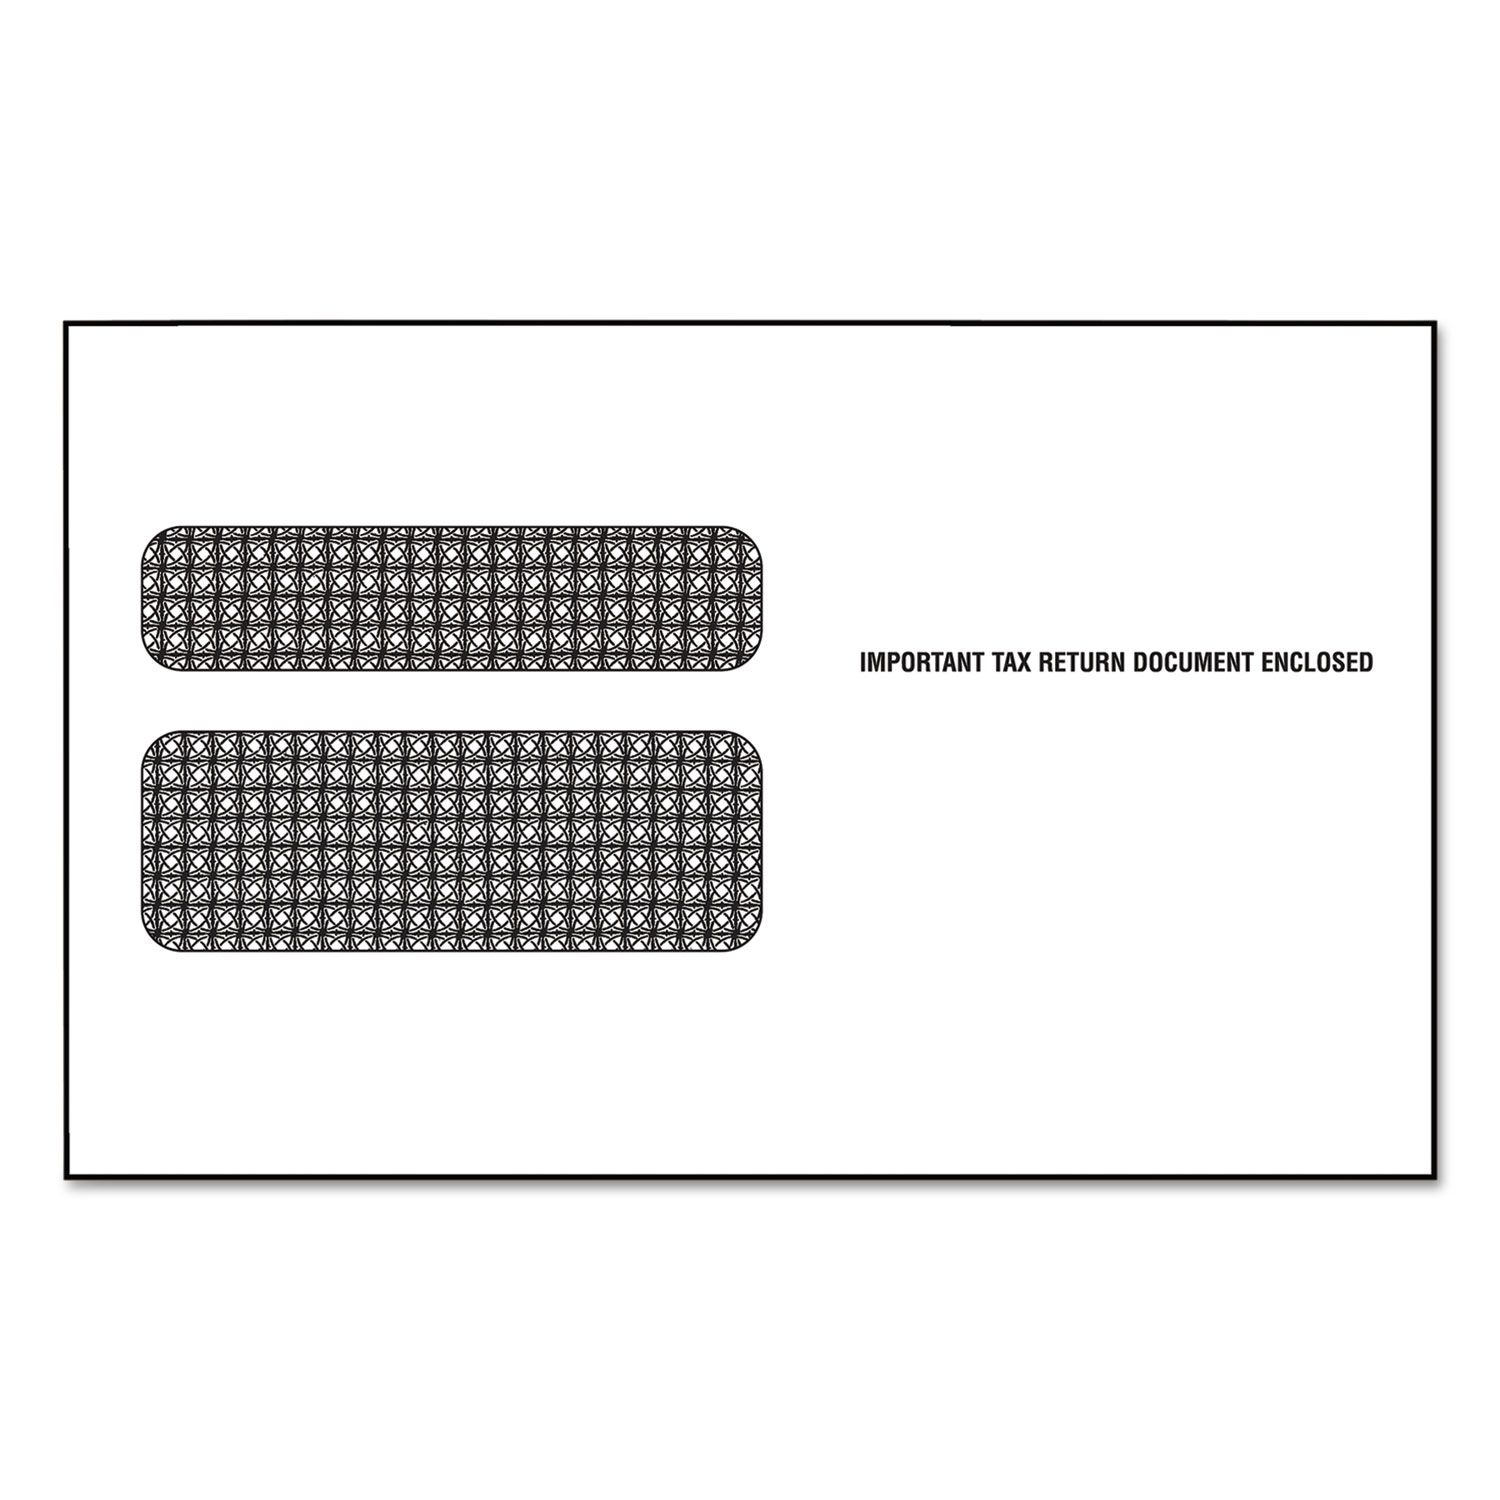 Double Window Envelope for Continuous W 2 Tax Forms, 9 1/2 x 5 5/8